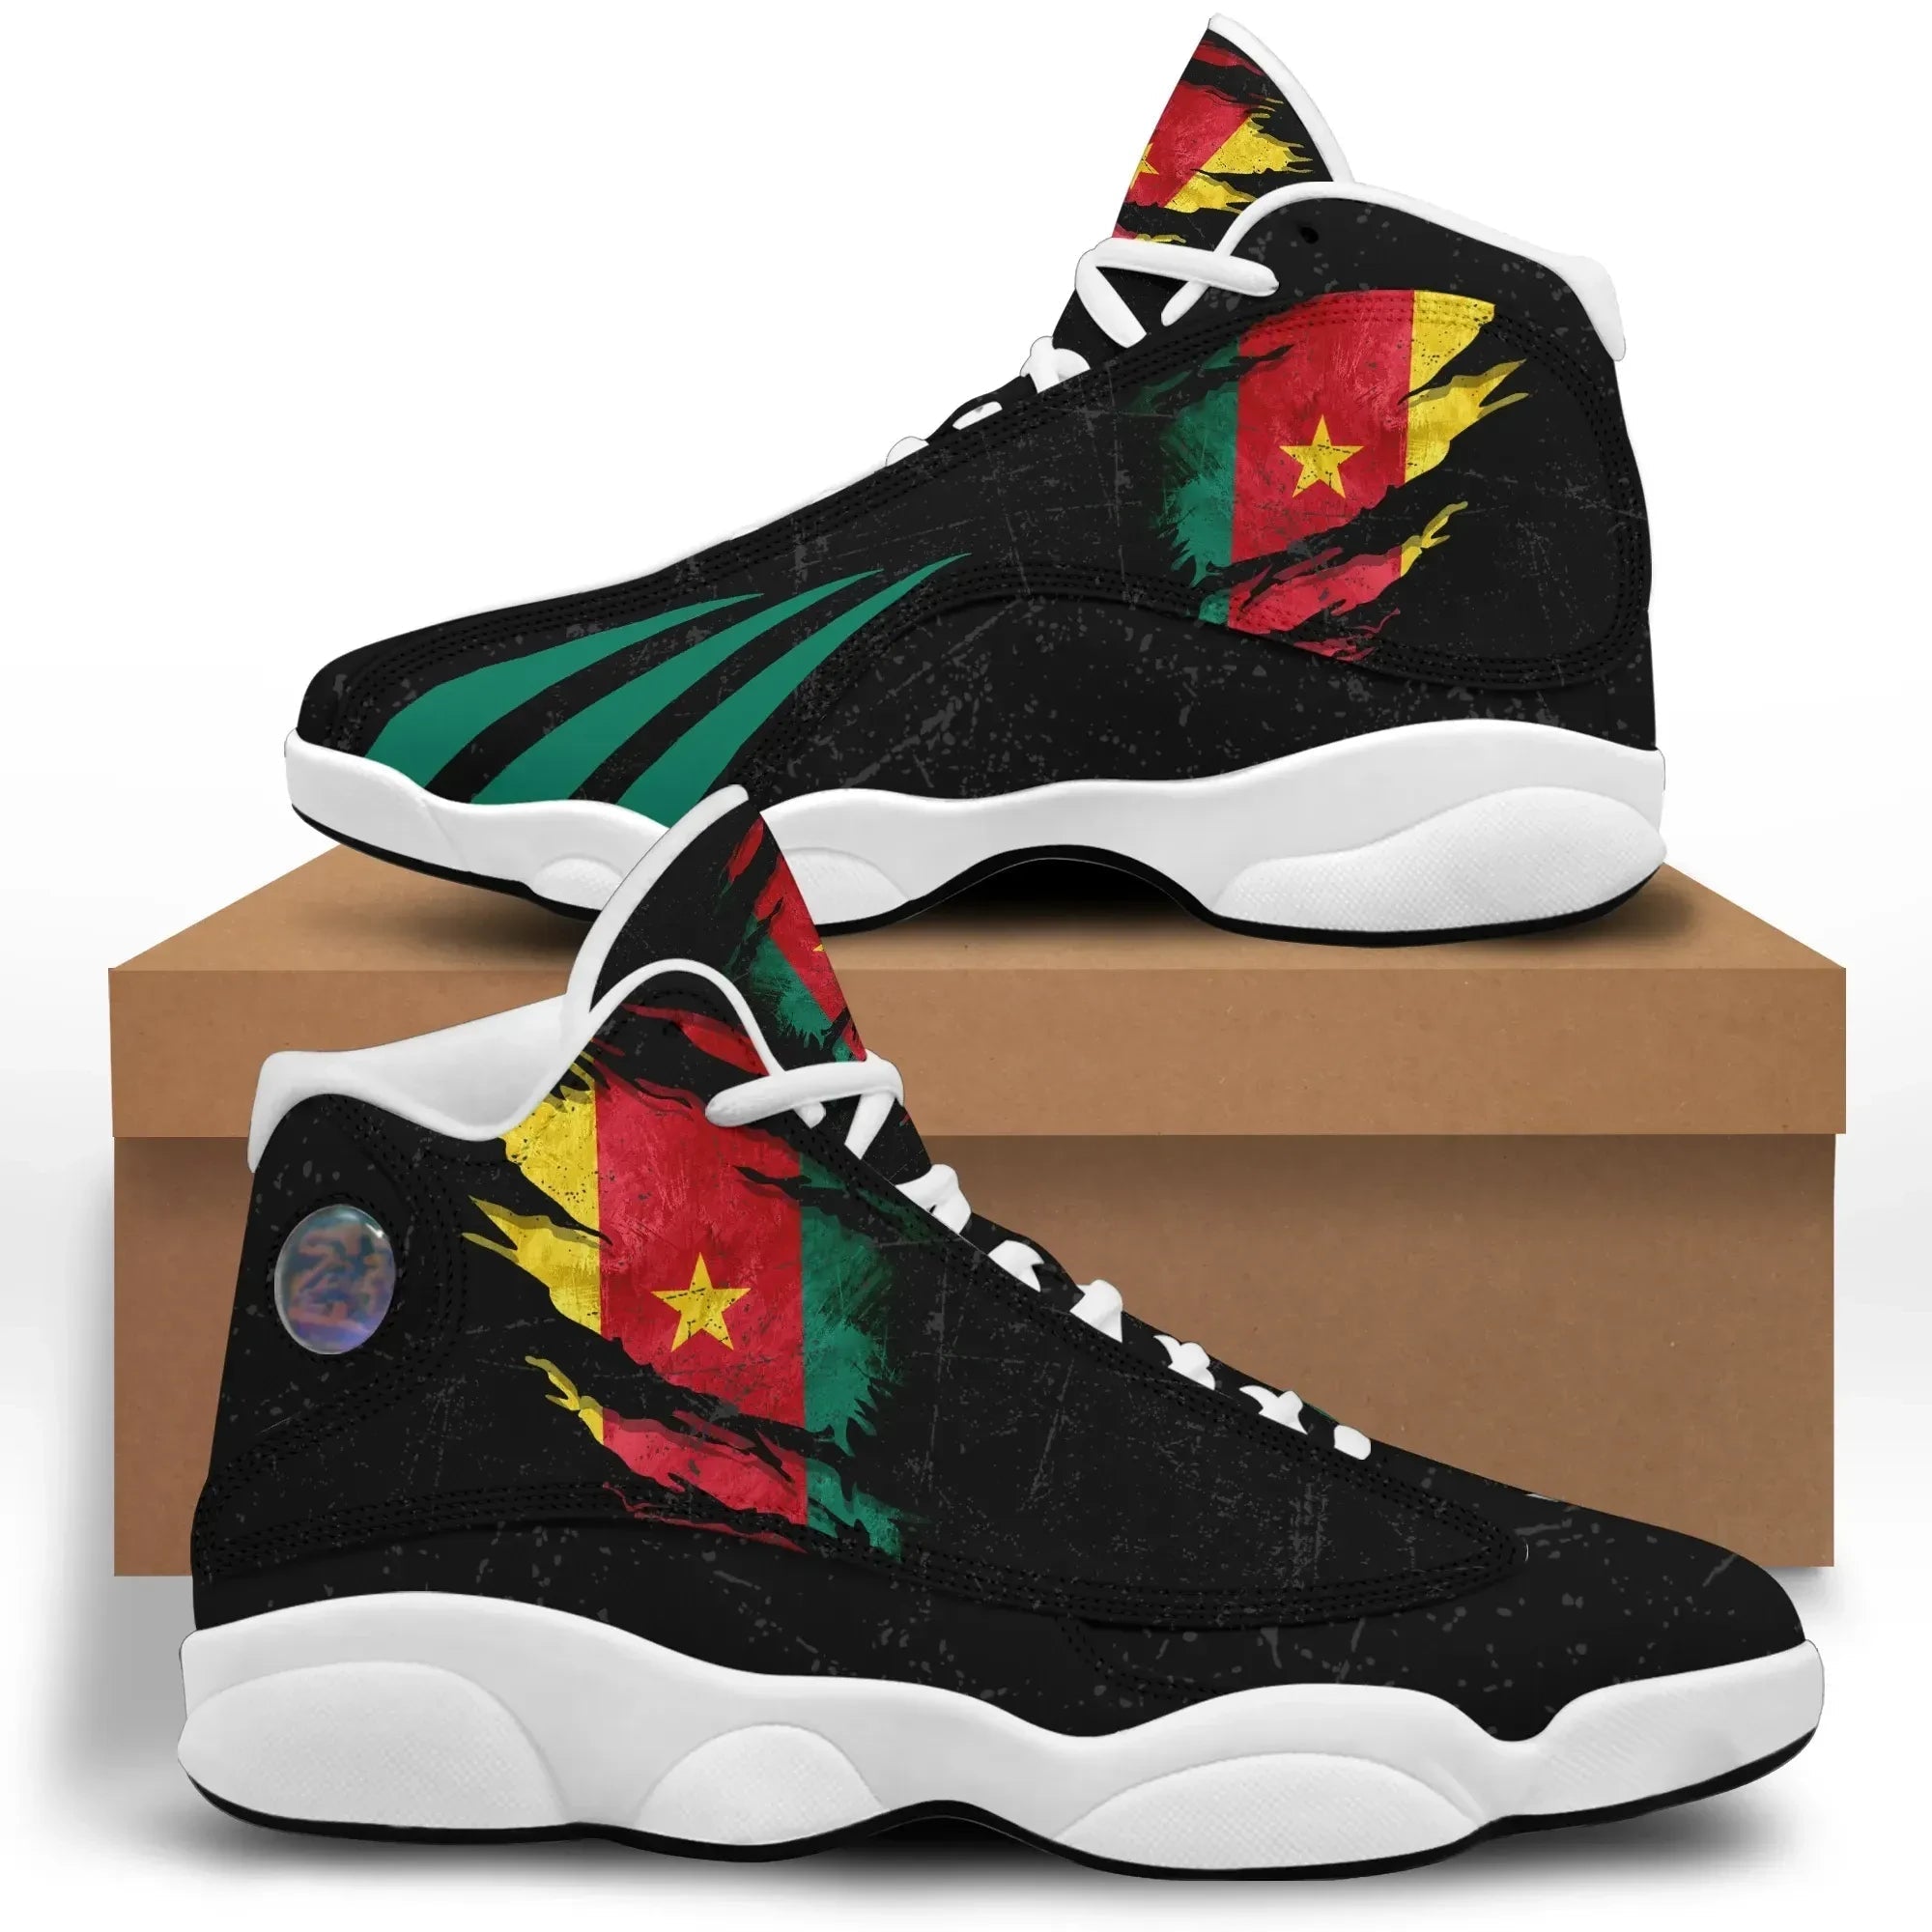 cameroon-in-me-high-top-sneakers-shoes-special-grunge-style